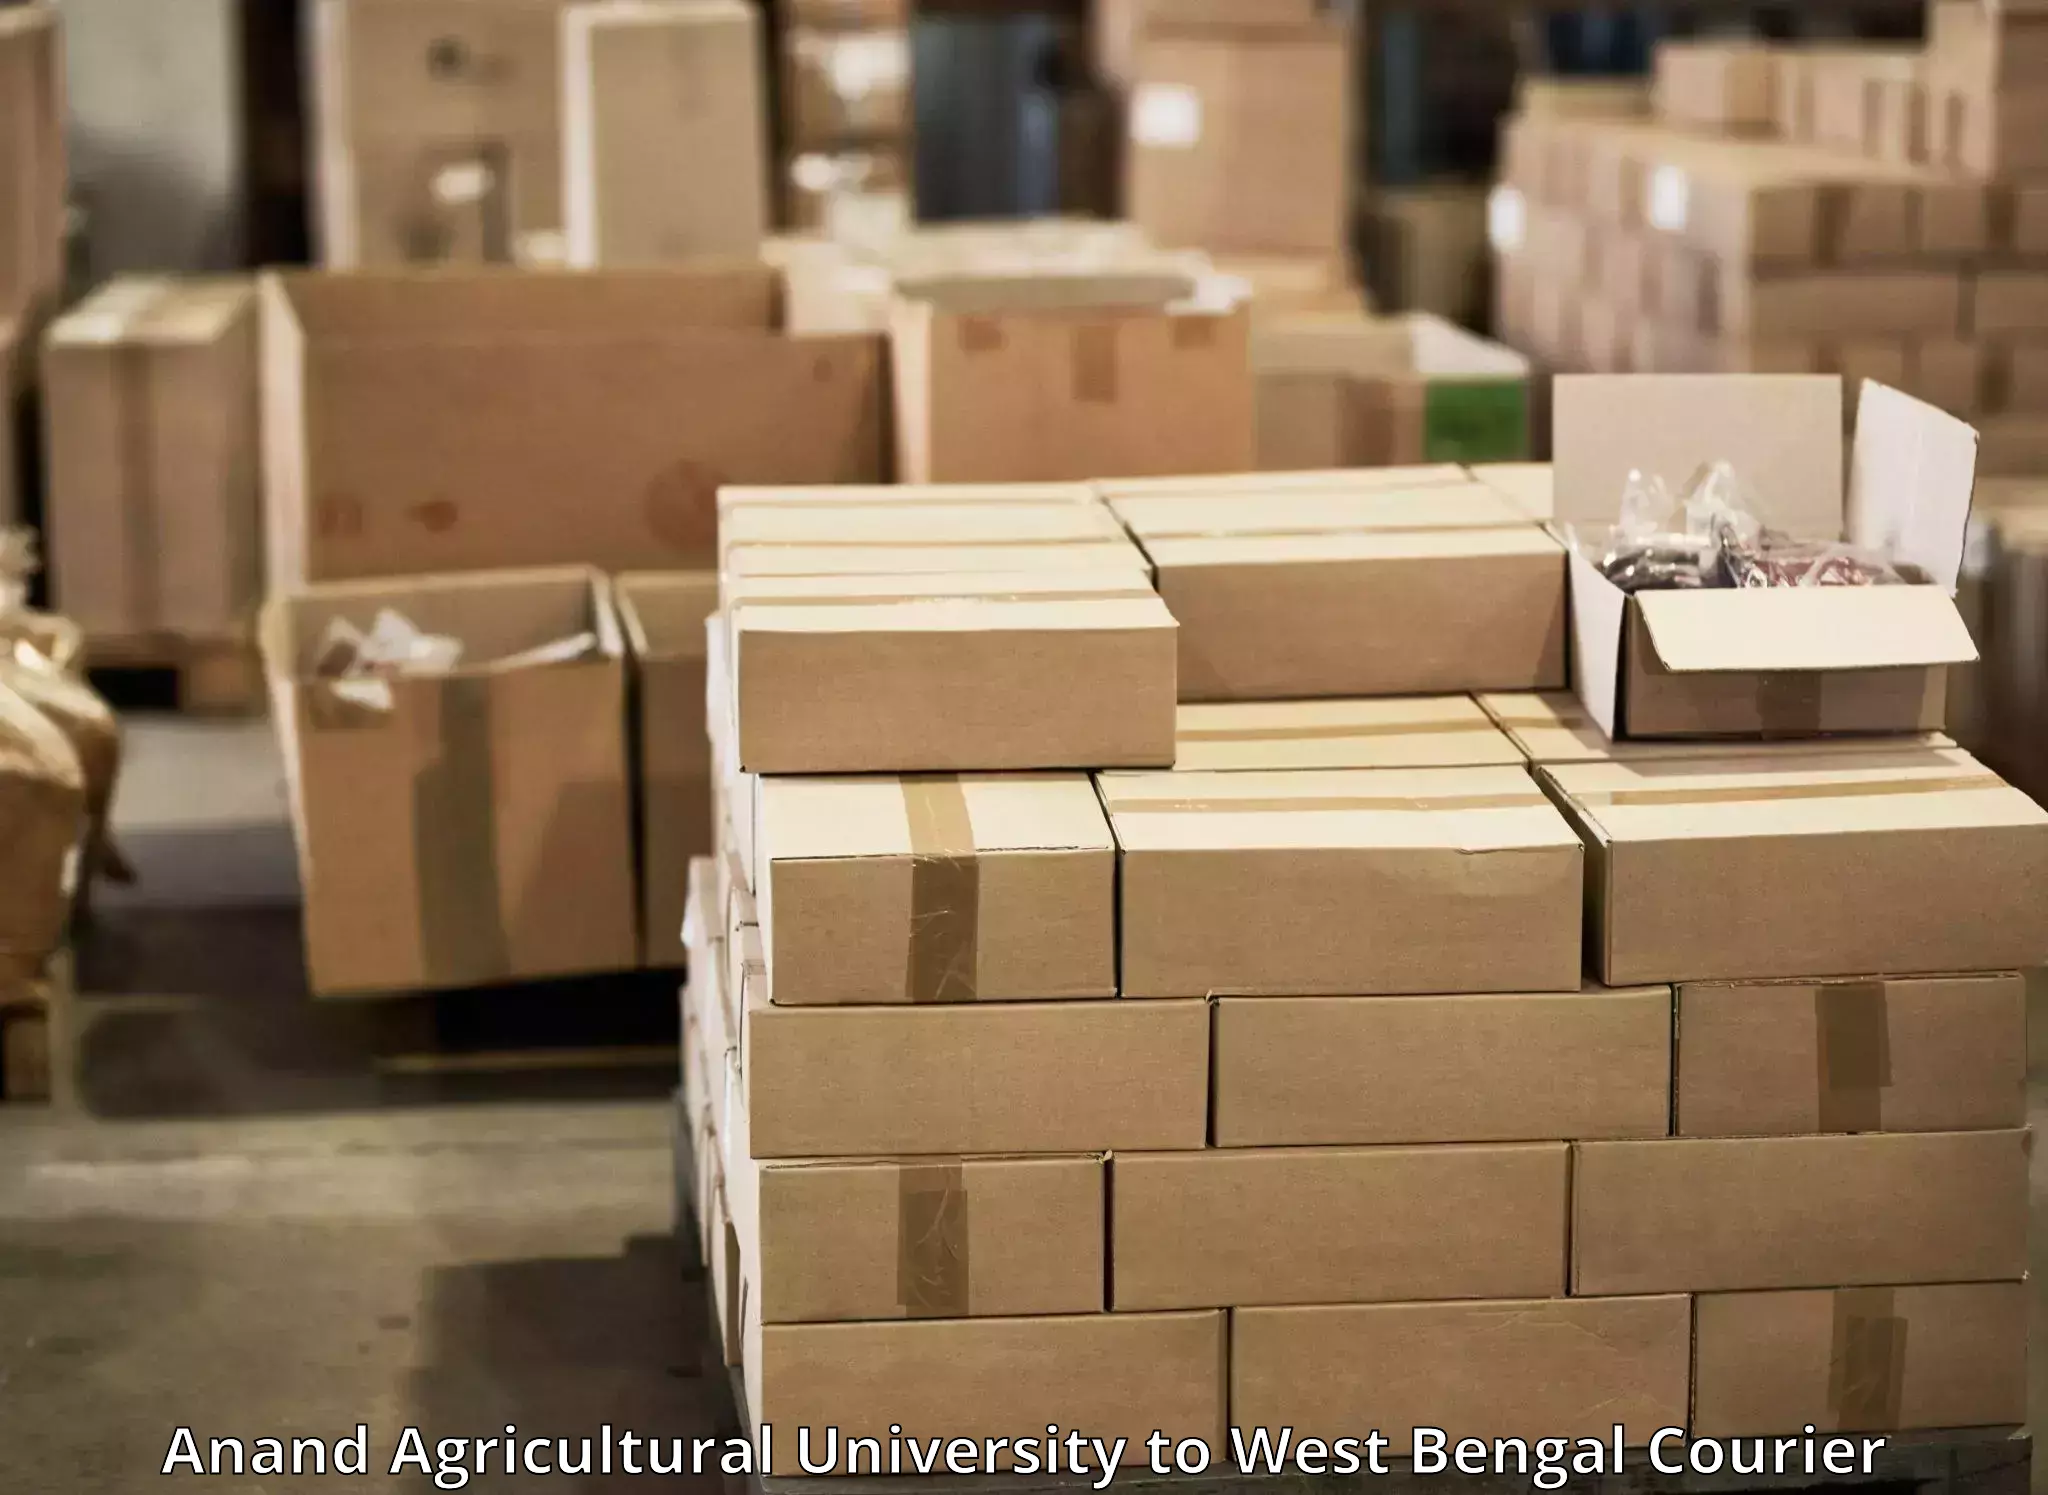 International parcel service Anand Agricultural University to Bagdogra